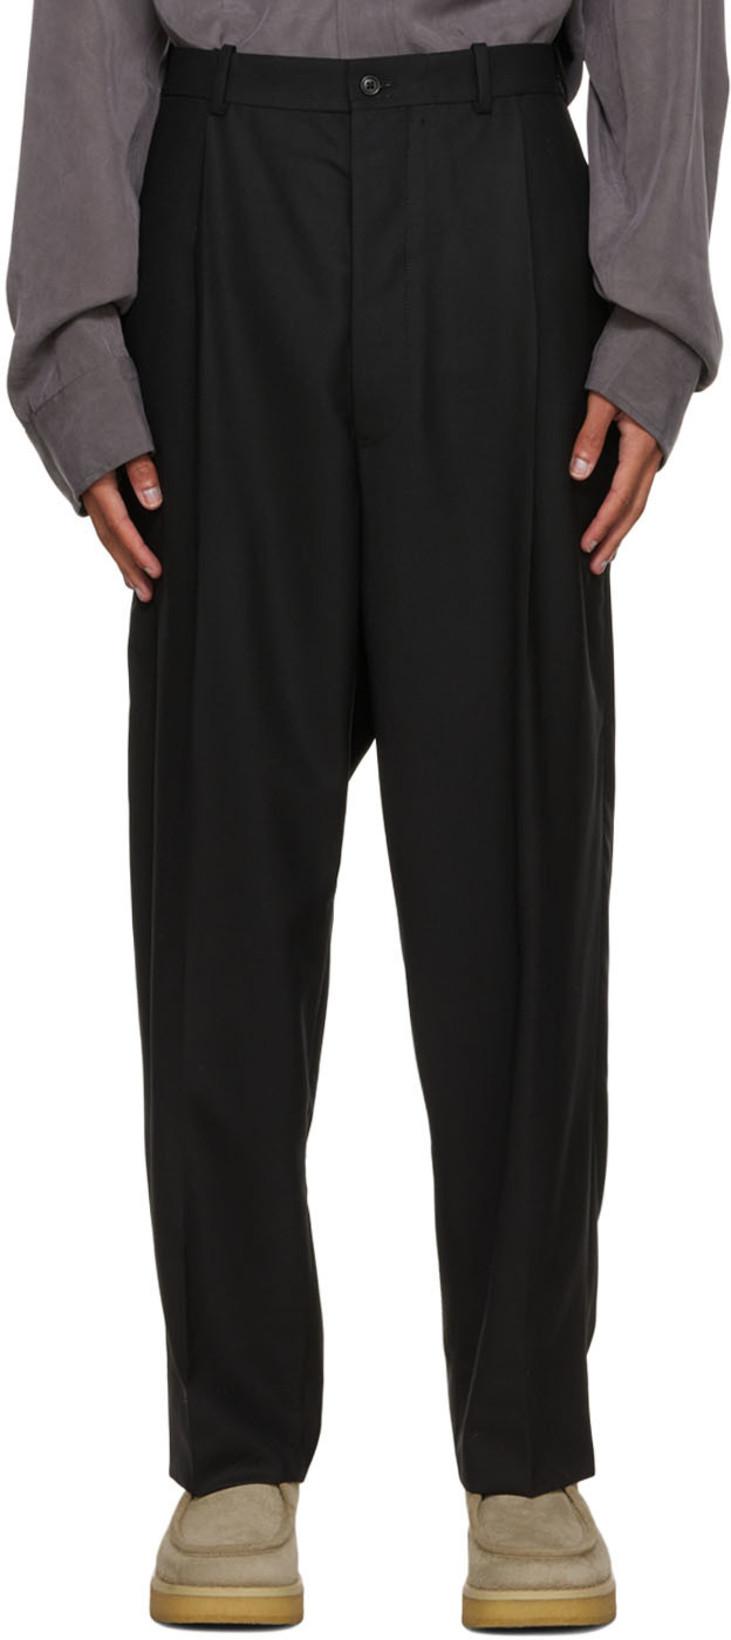 Black Pleated Suiting Trousers by CONNOR MC KNIGHT